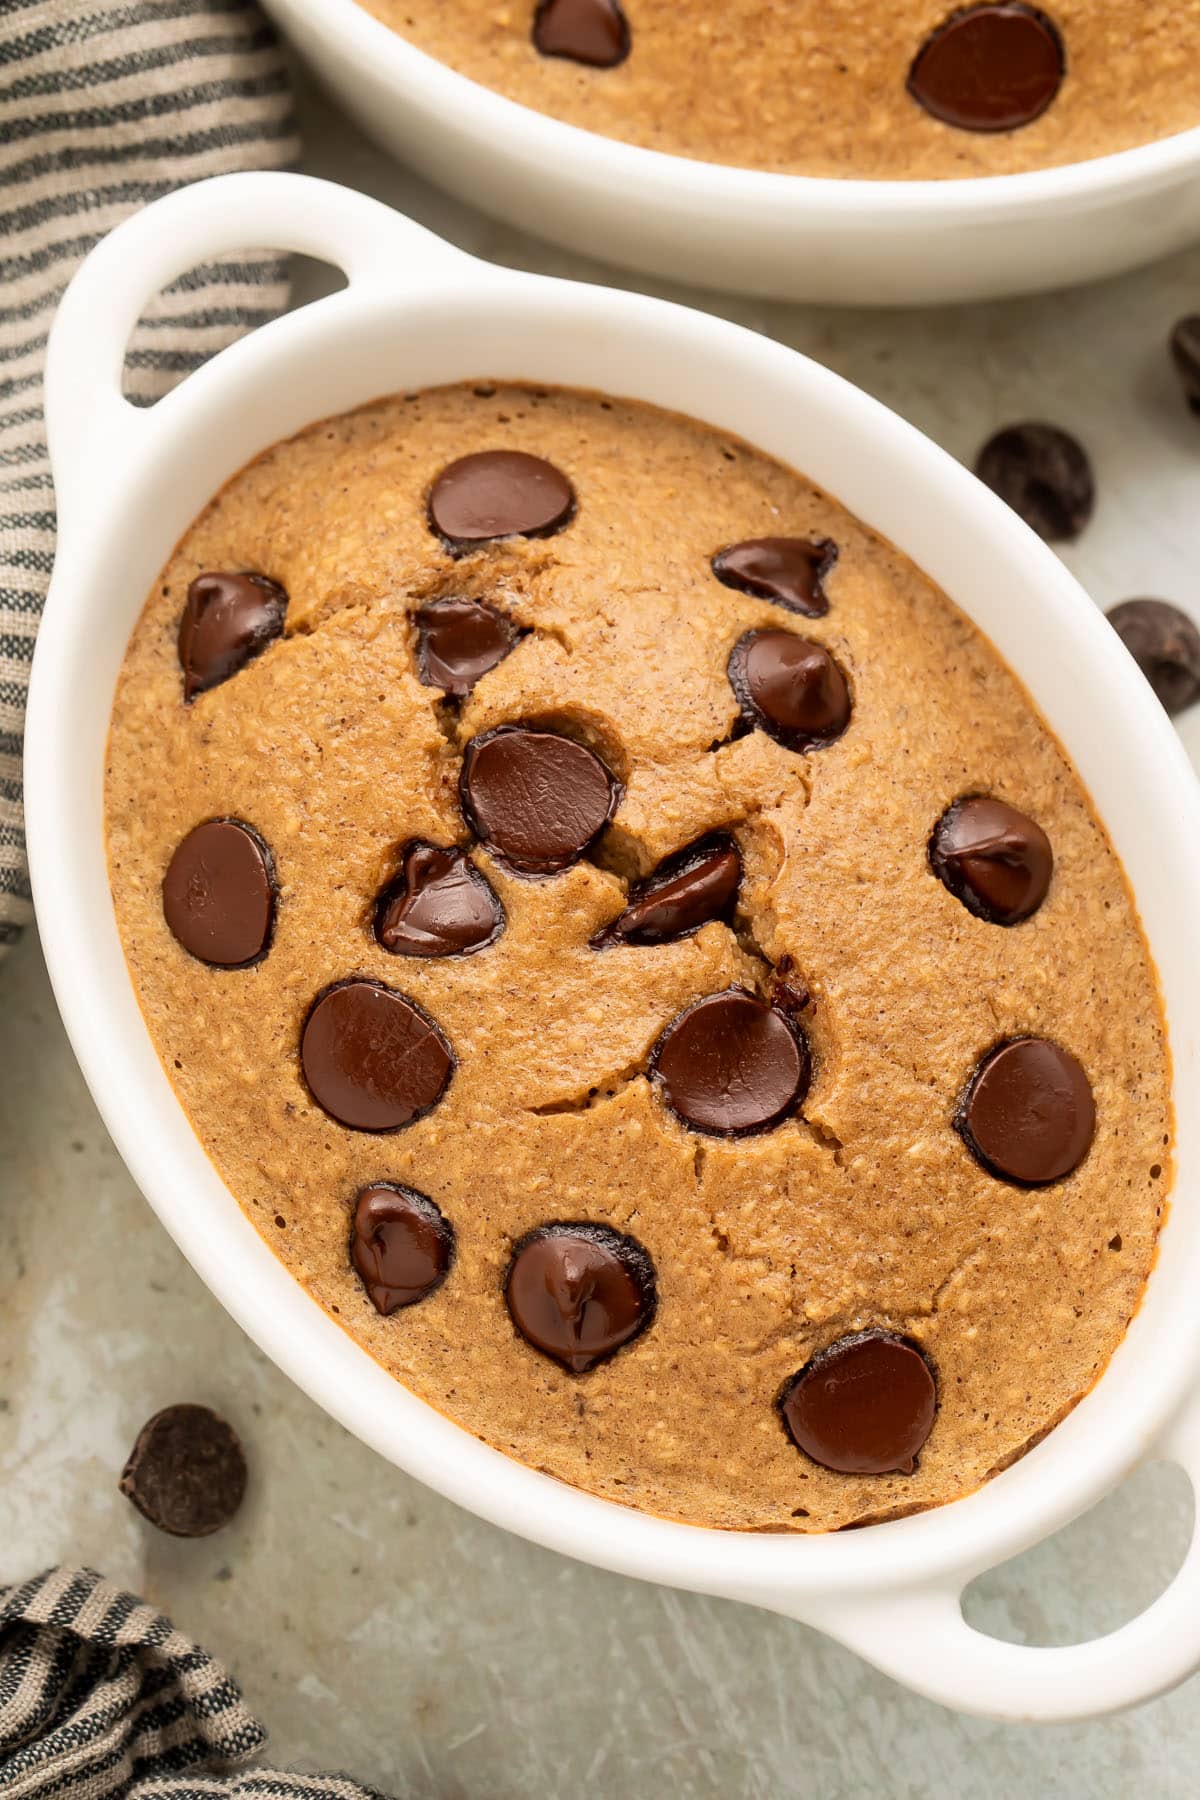 Top-down, close-up view of an oblong single-serve ramekin holding fluffy blended baked oats dotted with chocolate chips.